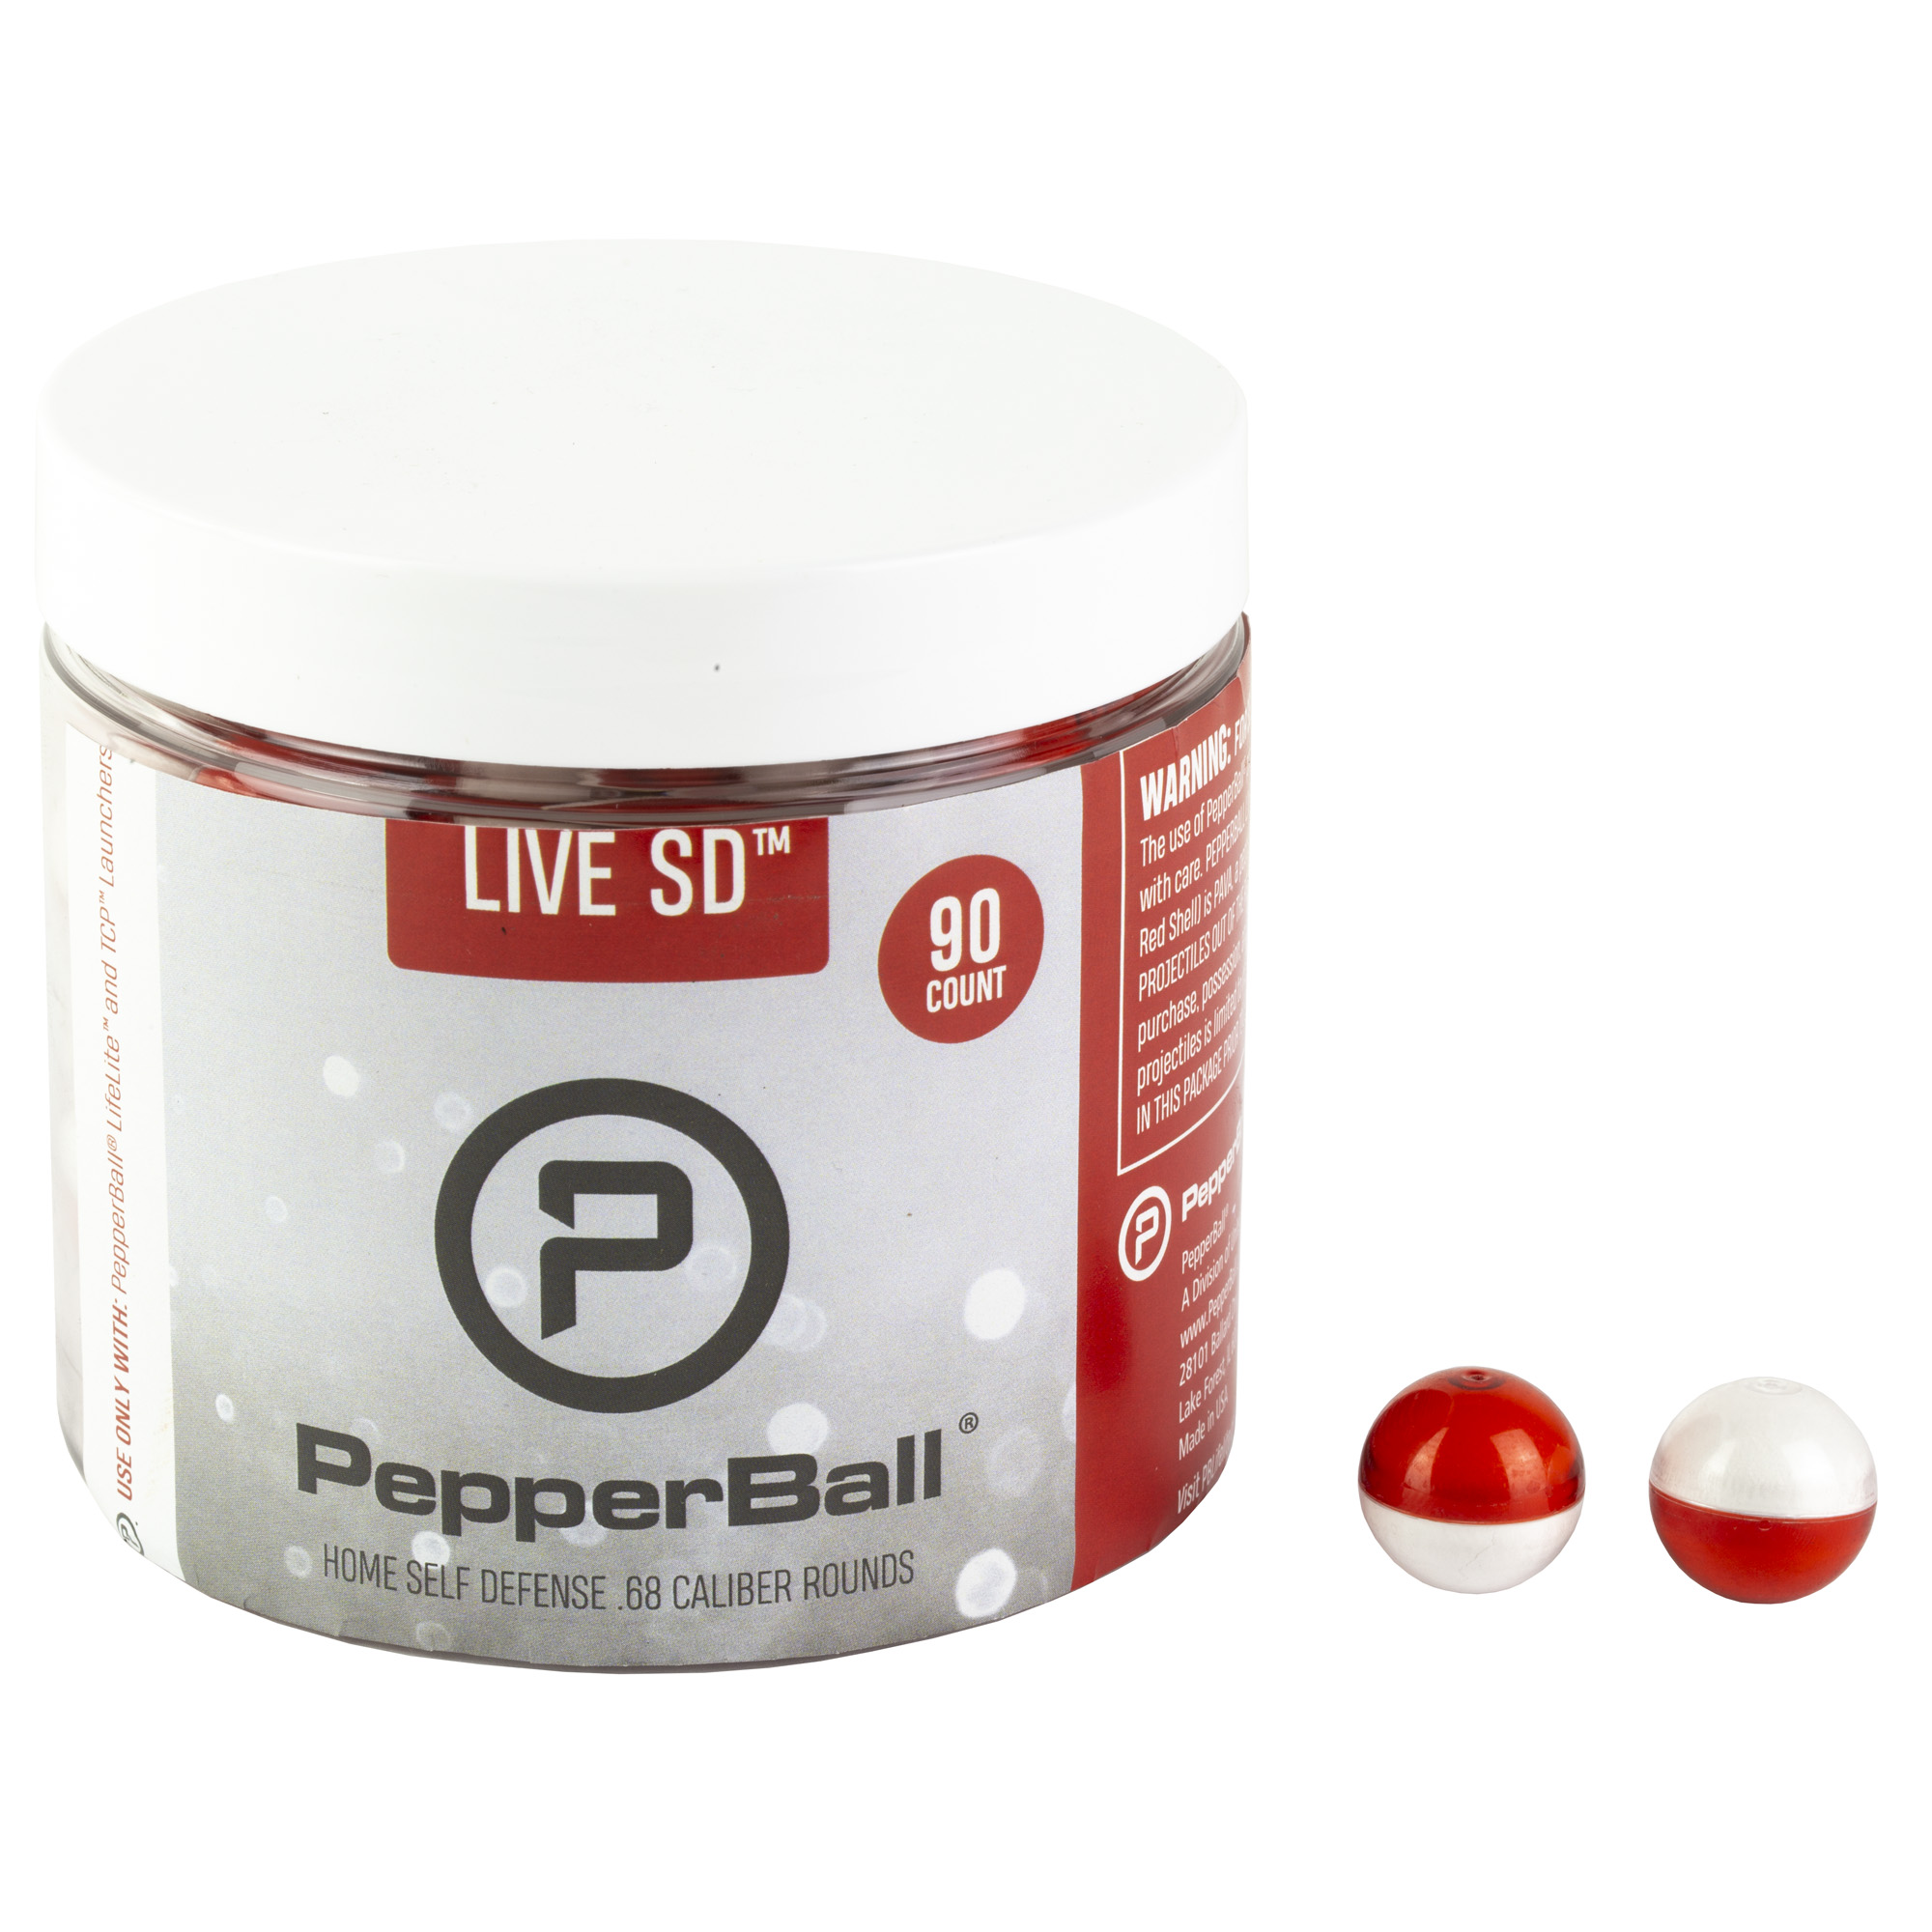 Pepperball Live Sd 90ct